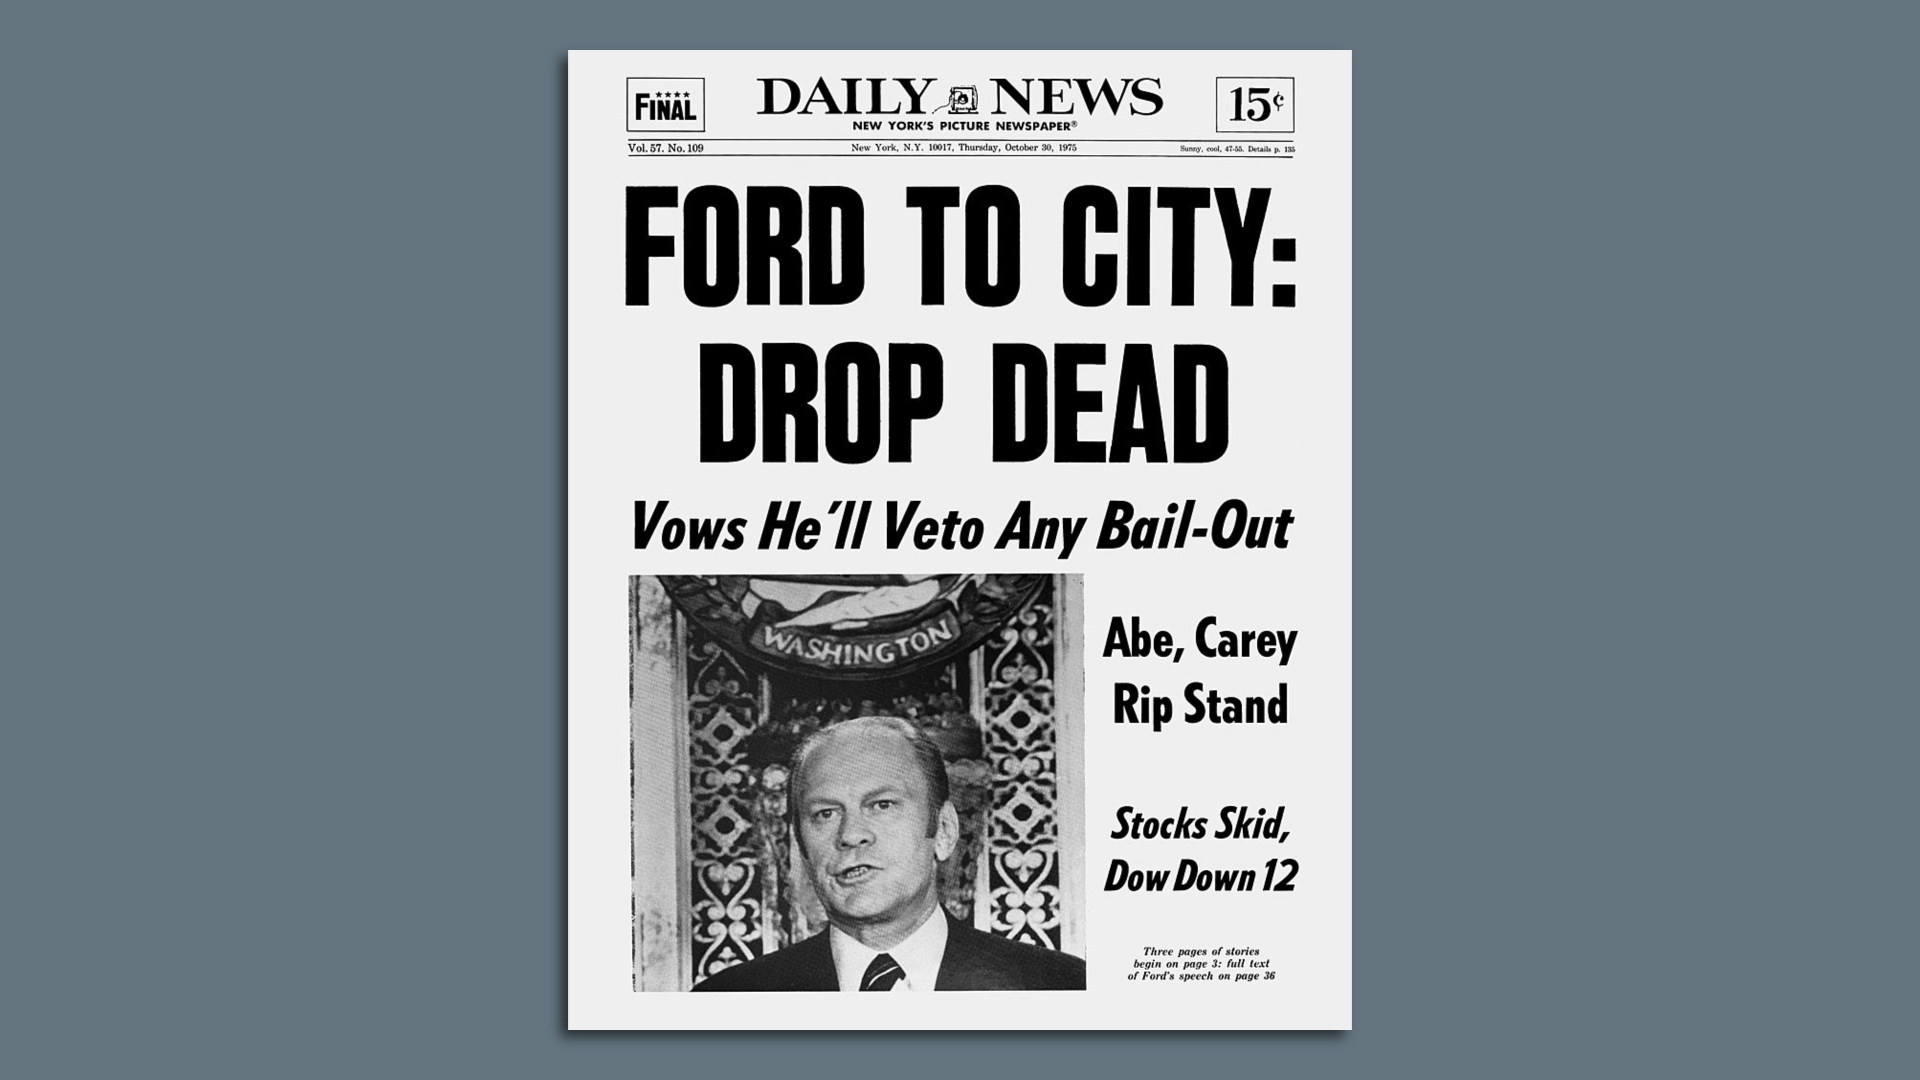 Photo illustration of the New York Daily News 1975 front page reading "Ford to city: Drop dead".